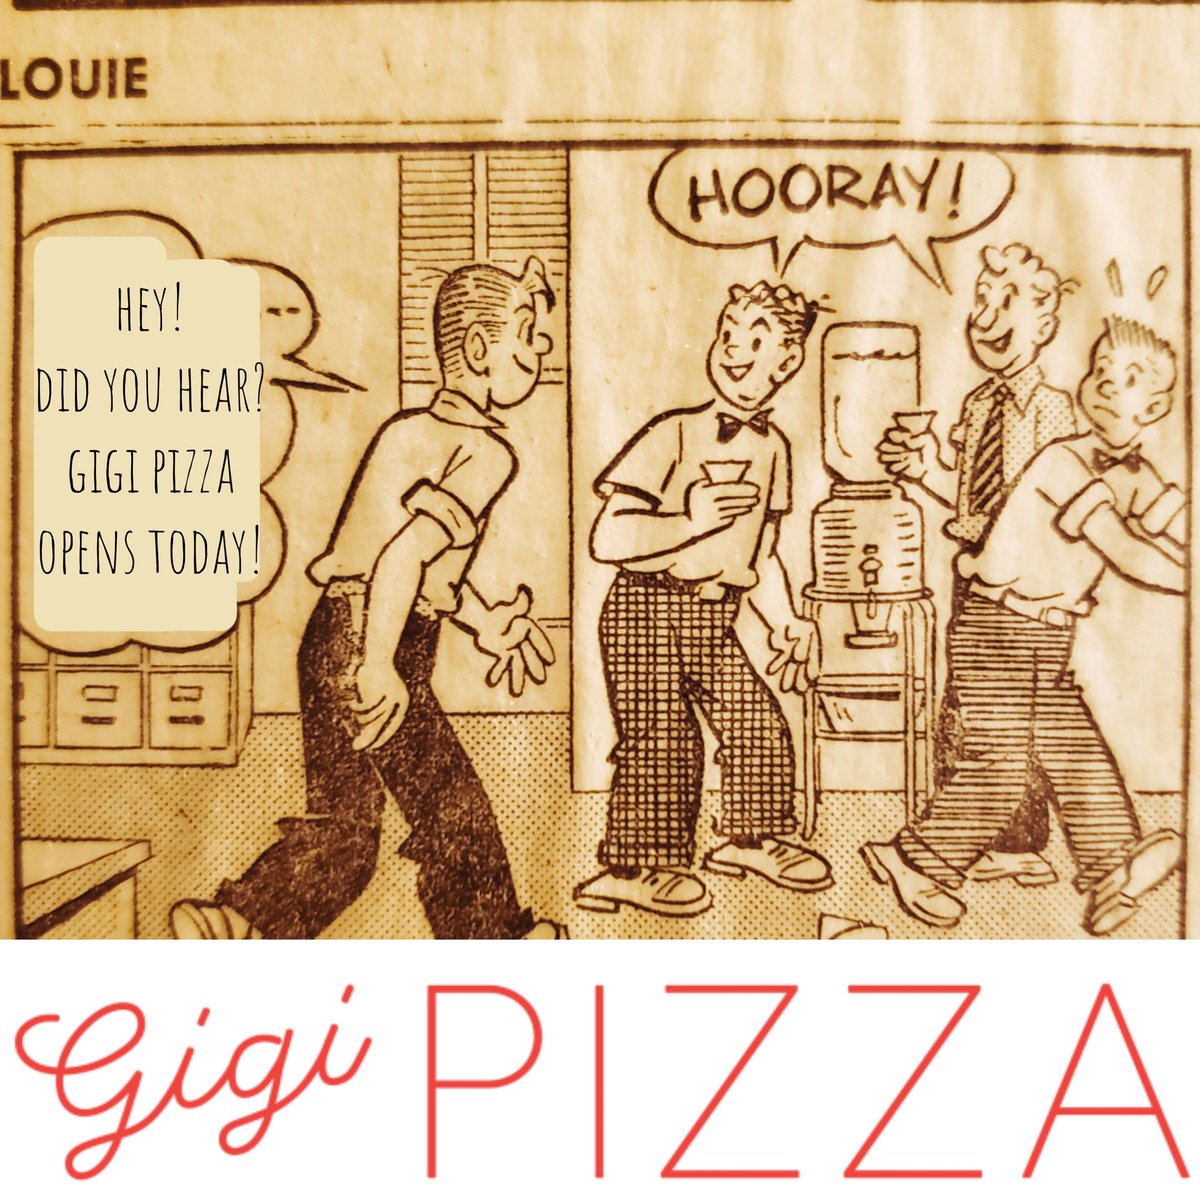 GIGI PIZZA *NOW OPEN*
peep our new hours and stop in for some late night pizza at the bar!
.
.
.
#ObviOlly #QueenVillage #EaterPhilly #YoPhillyMag #Foobooz #EdiblePhilly #VisitPhilly #uwishunu #PhillyEats #PhillyFoodies #MyPhilaStory #LovePhillyFood #PHLspecial #PhillyDailyDeals